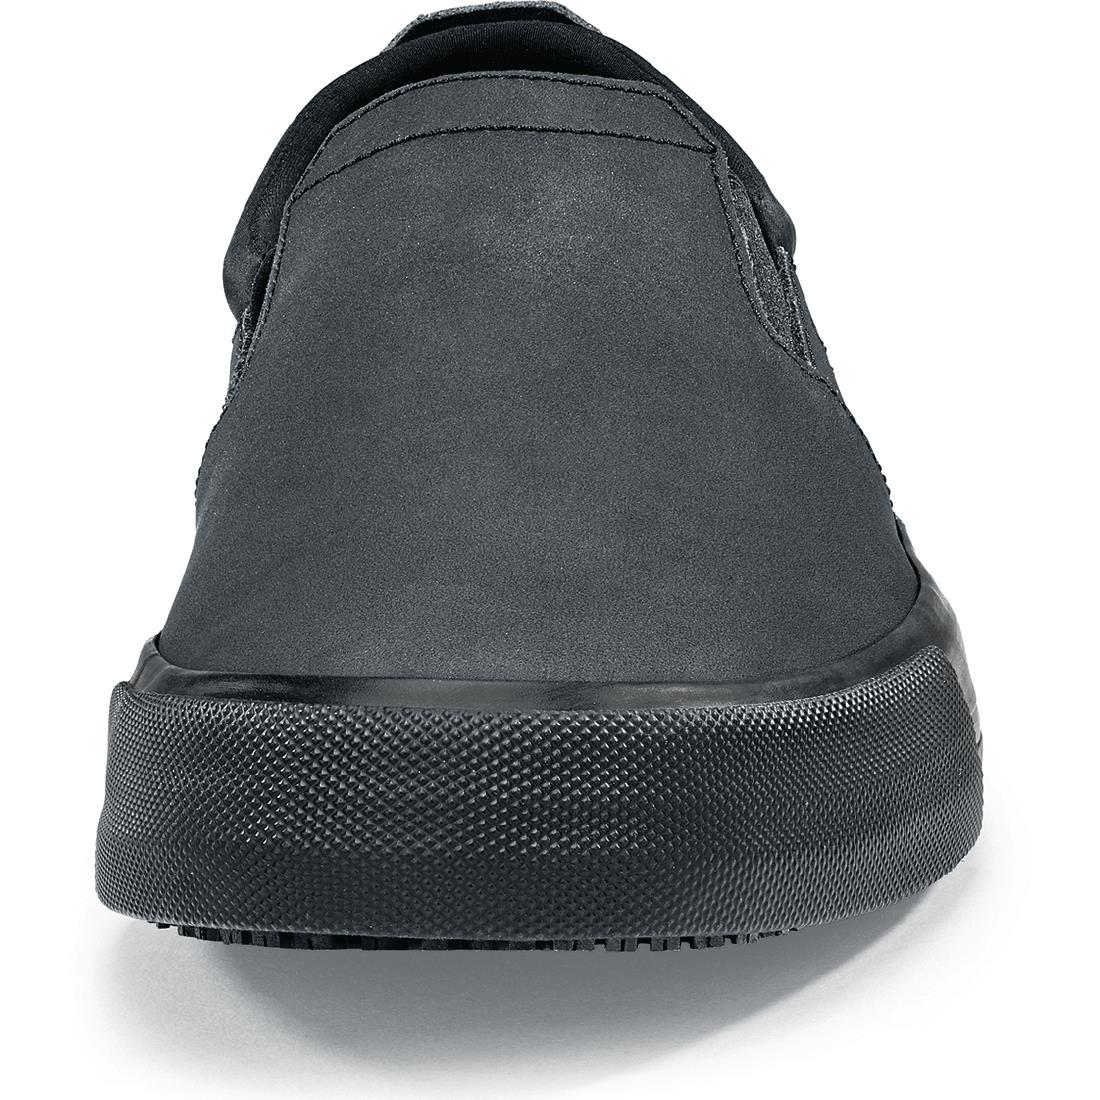 Shoes for Crews Leather Slip On Size 45 - BB163-45  - 2